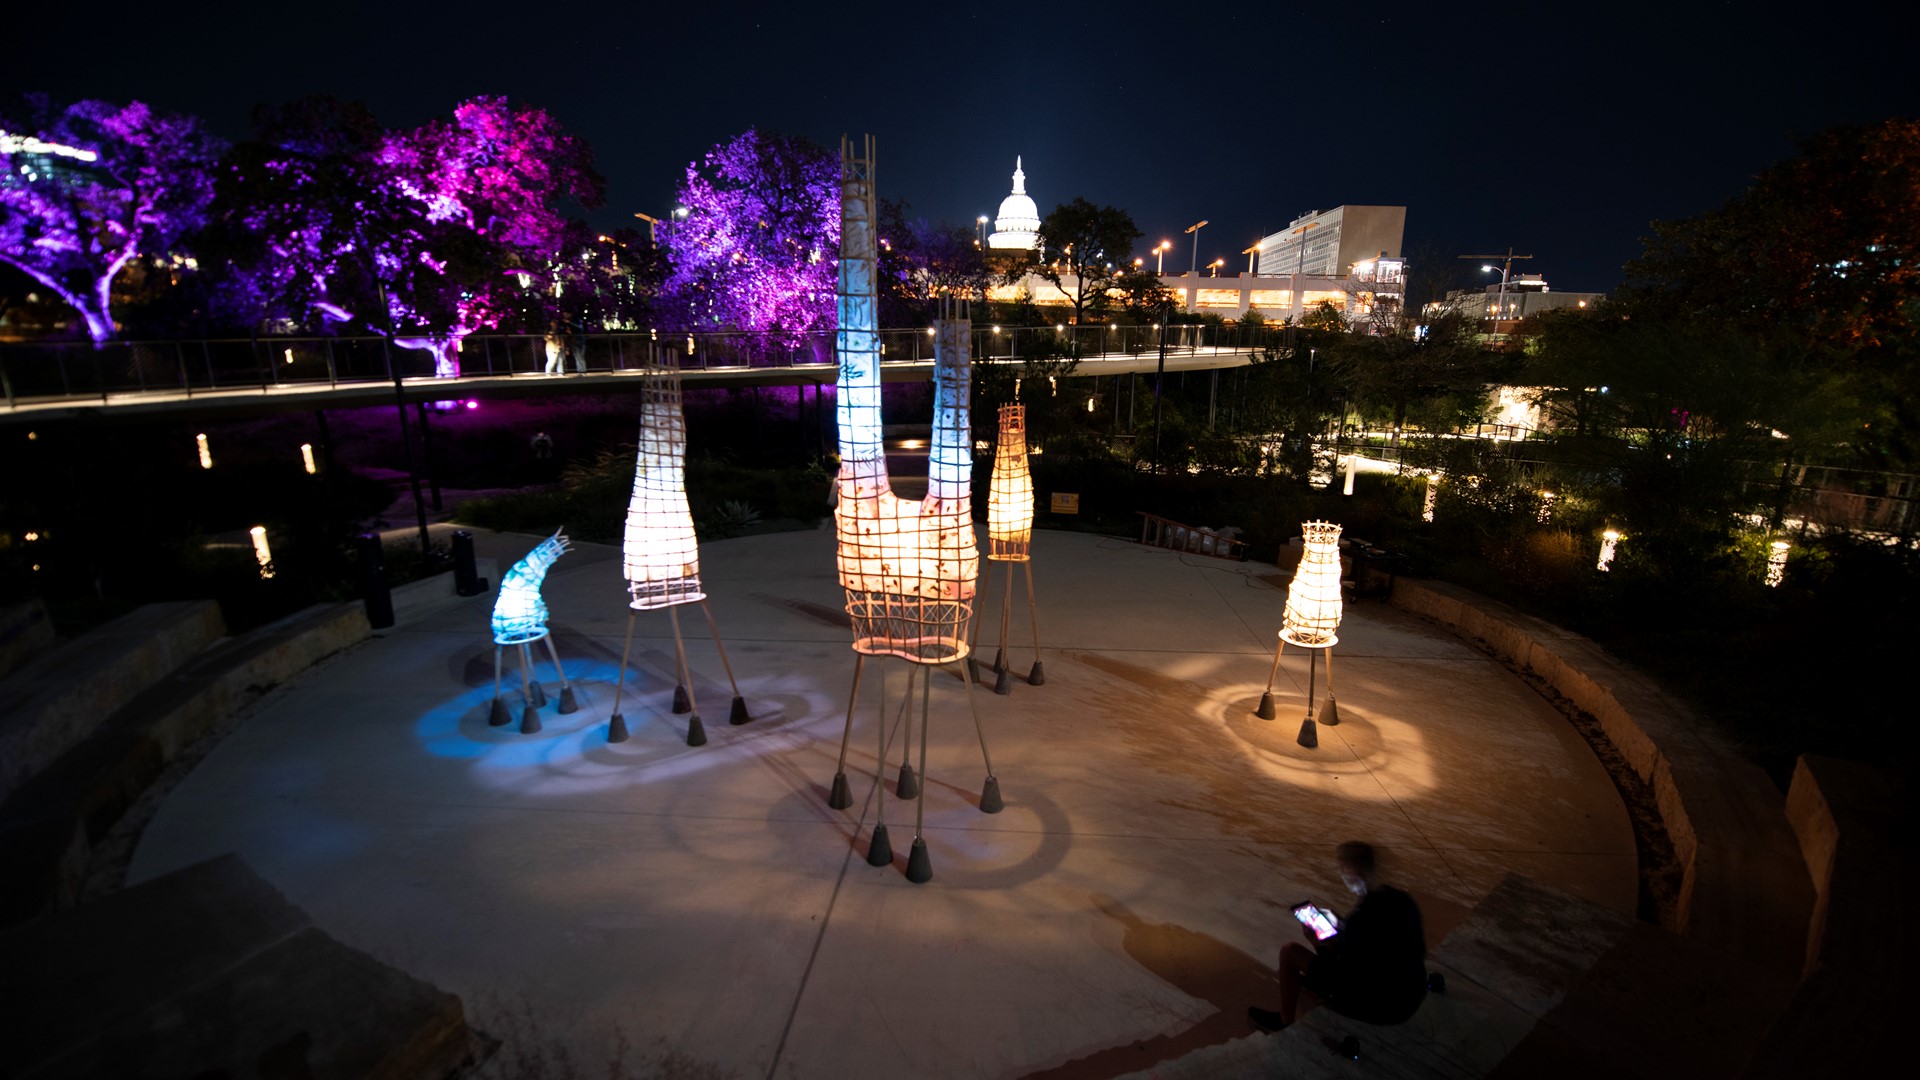 Enjoy the illuminated art displays created by local artists, landscape architects and designers along with live music, food and family-friendly activities.